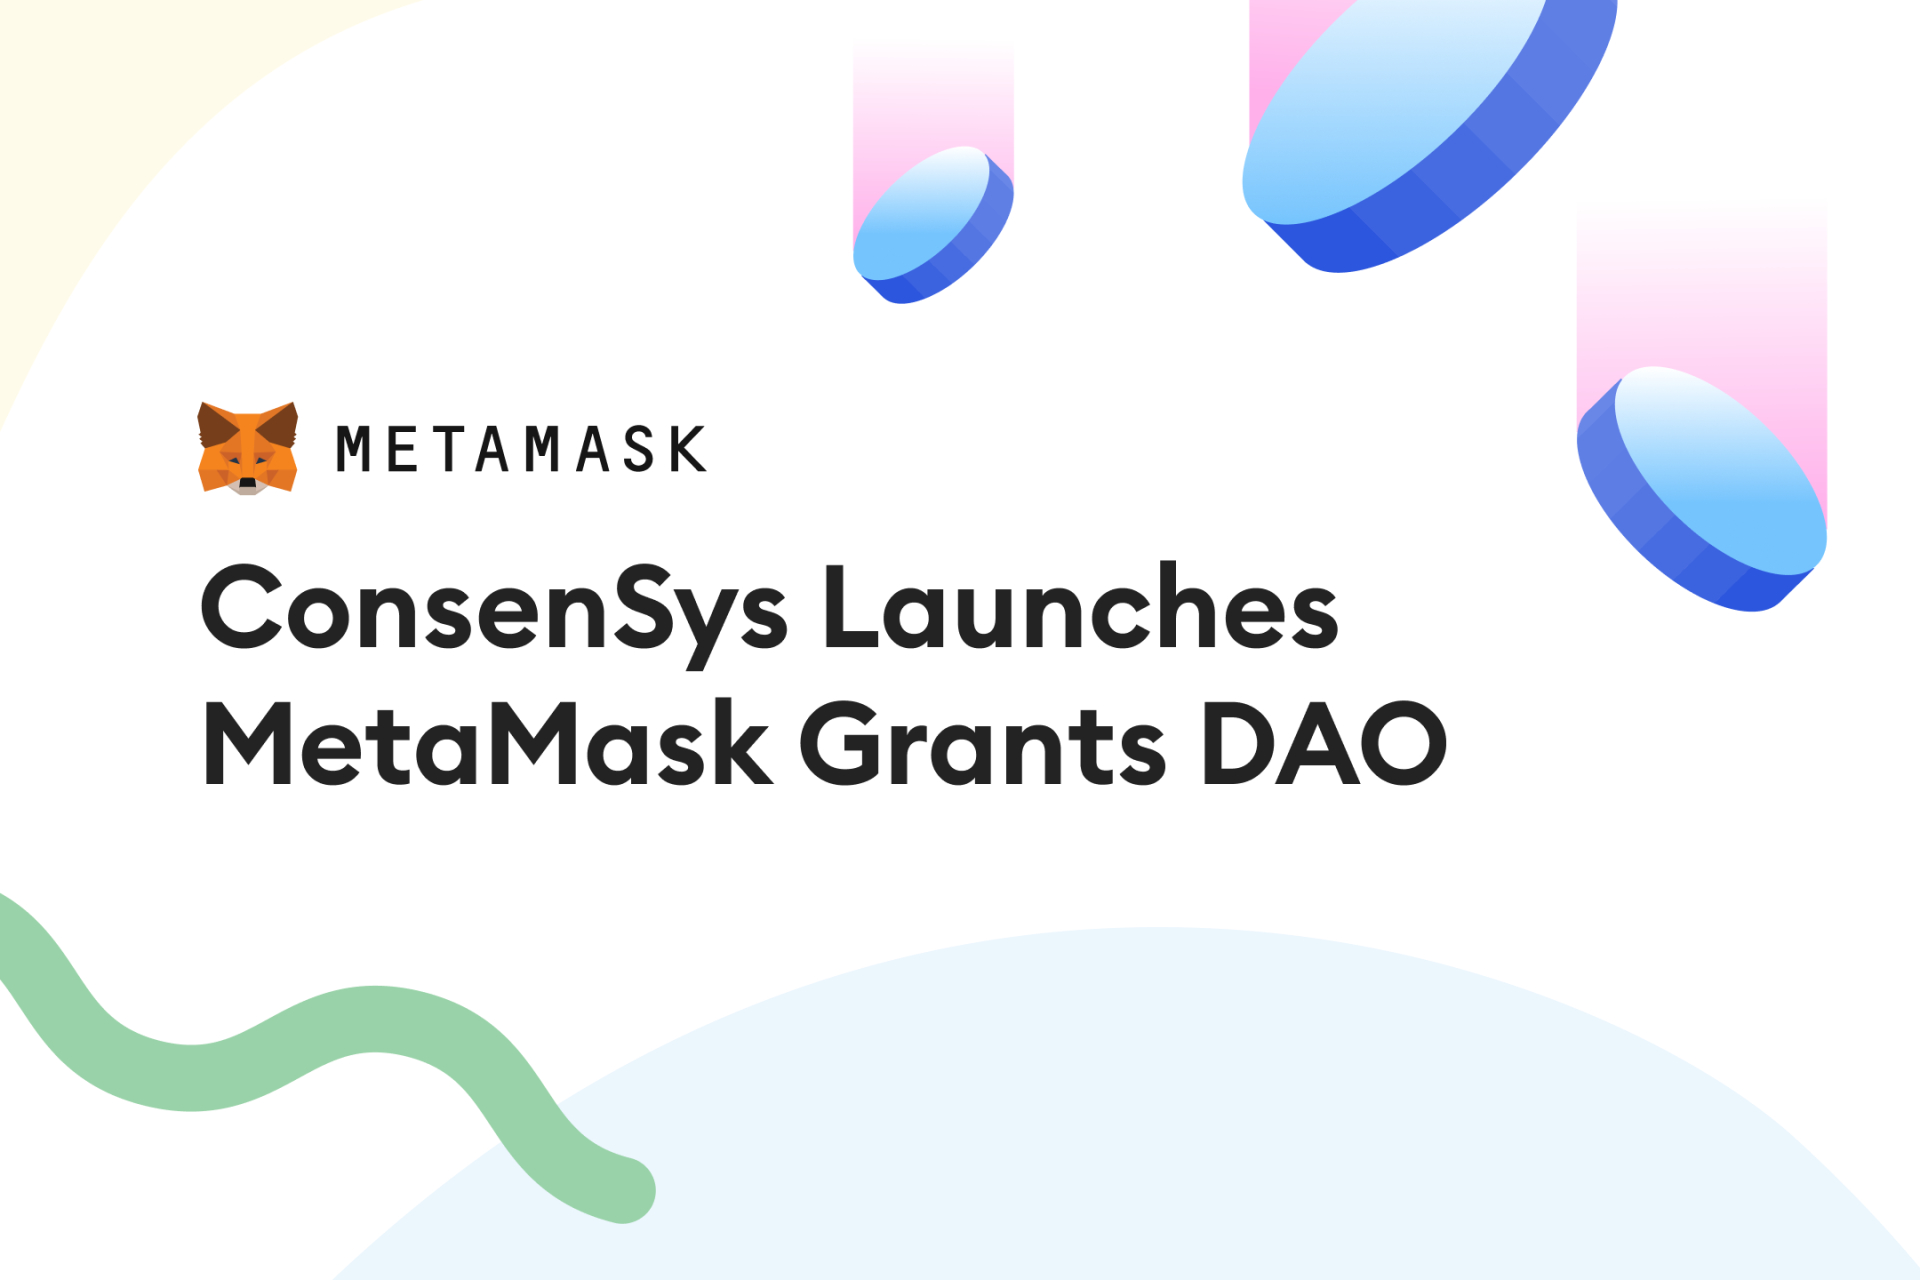 ConsenSys launches the new DAO focused on accelerating the development of the MetaMask portfolio